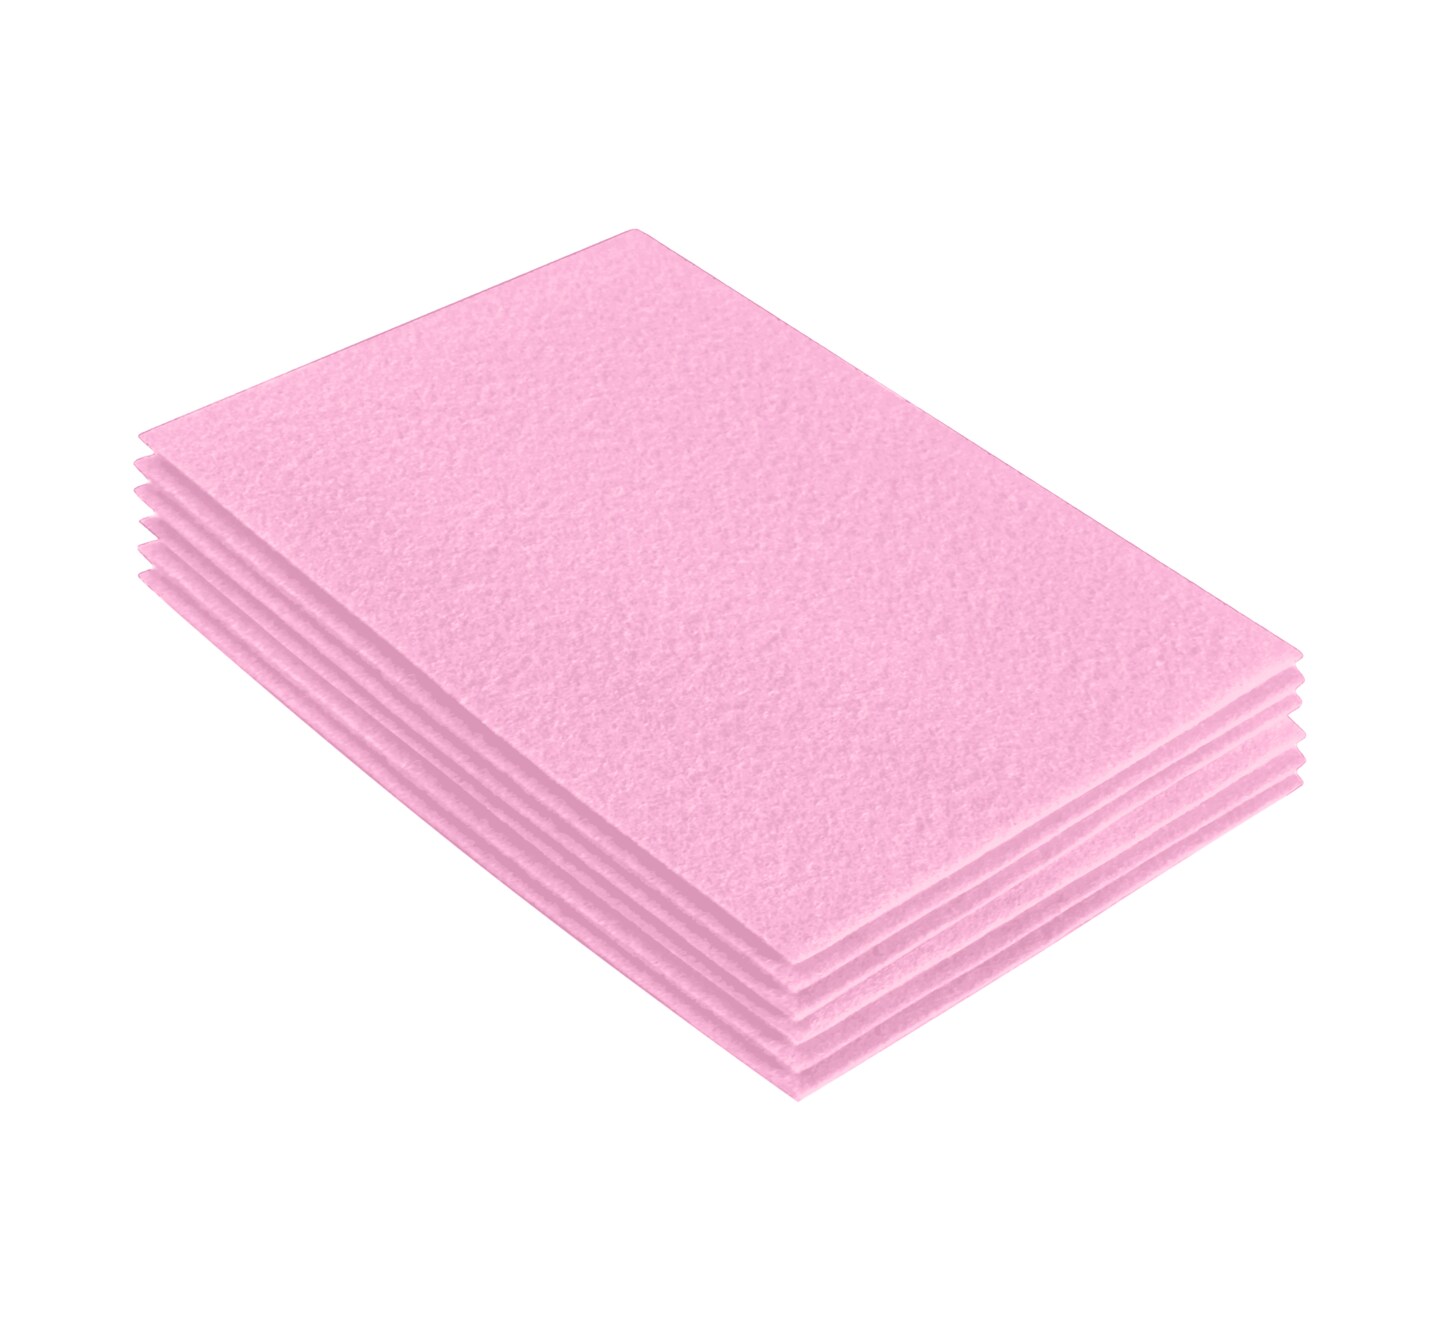 Baby Pink Felt Material Acrylic Felt Material 1.6mm Thick